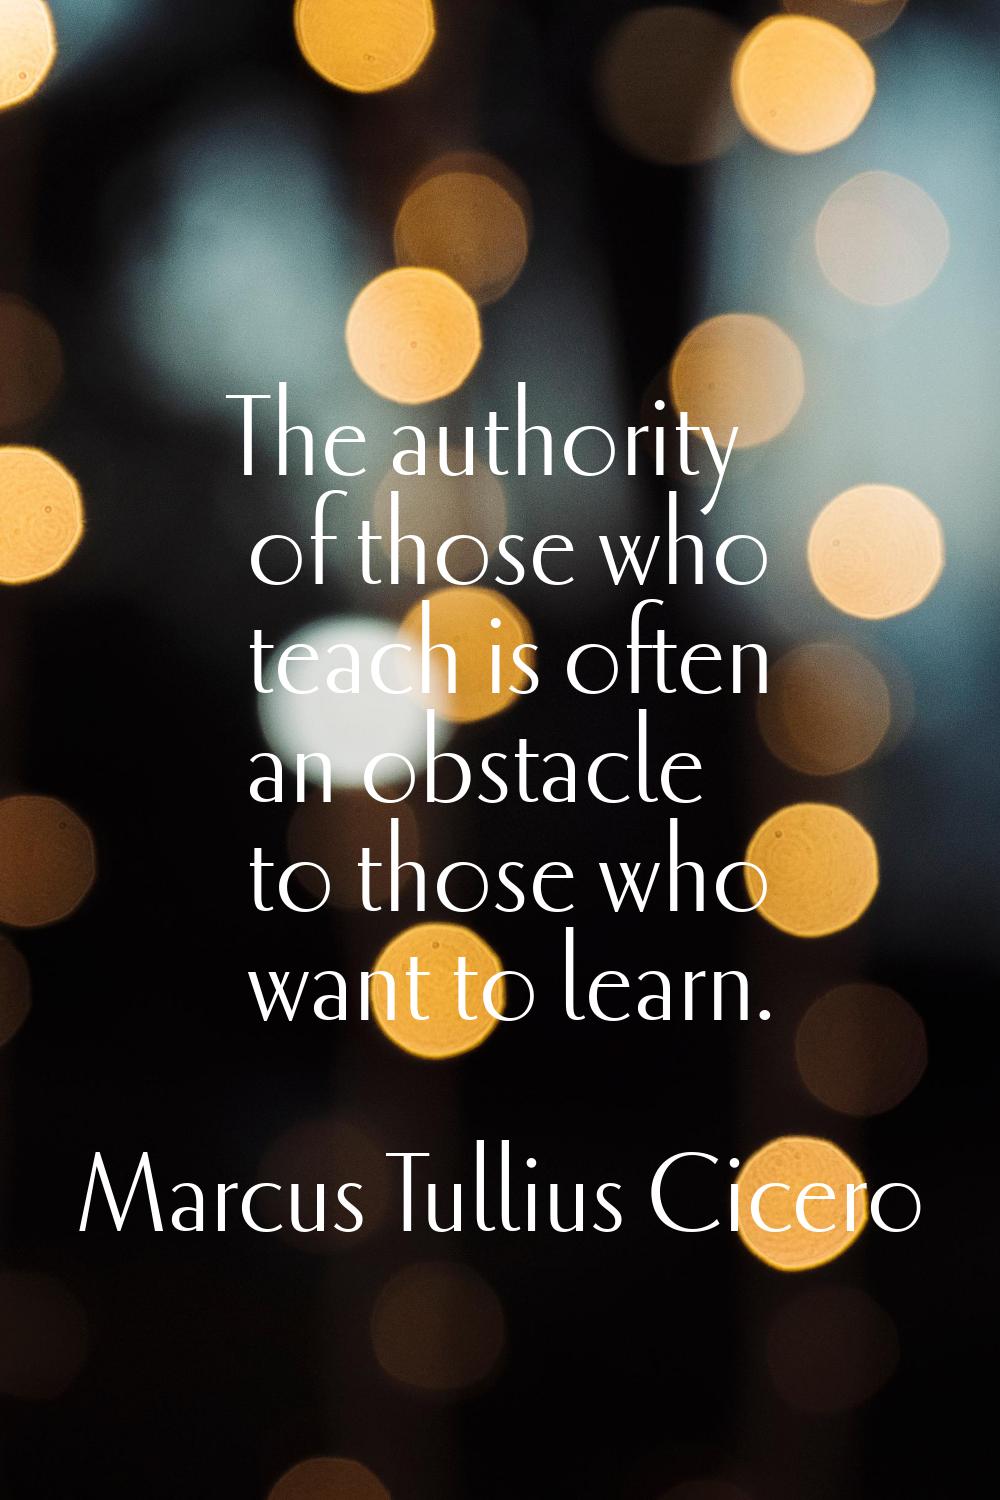 The authority of those who teach is often an obstacle to those who want to learn.